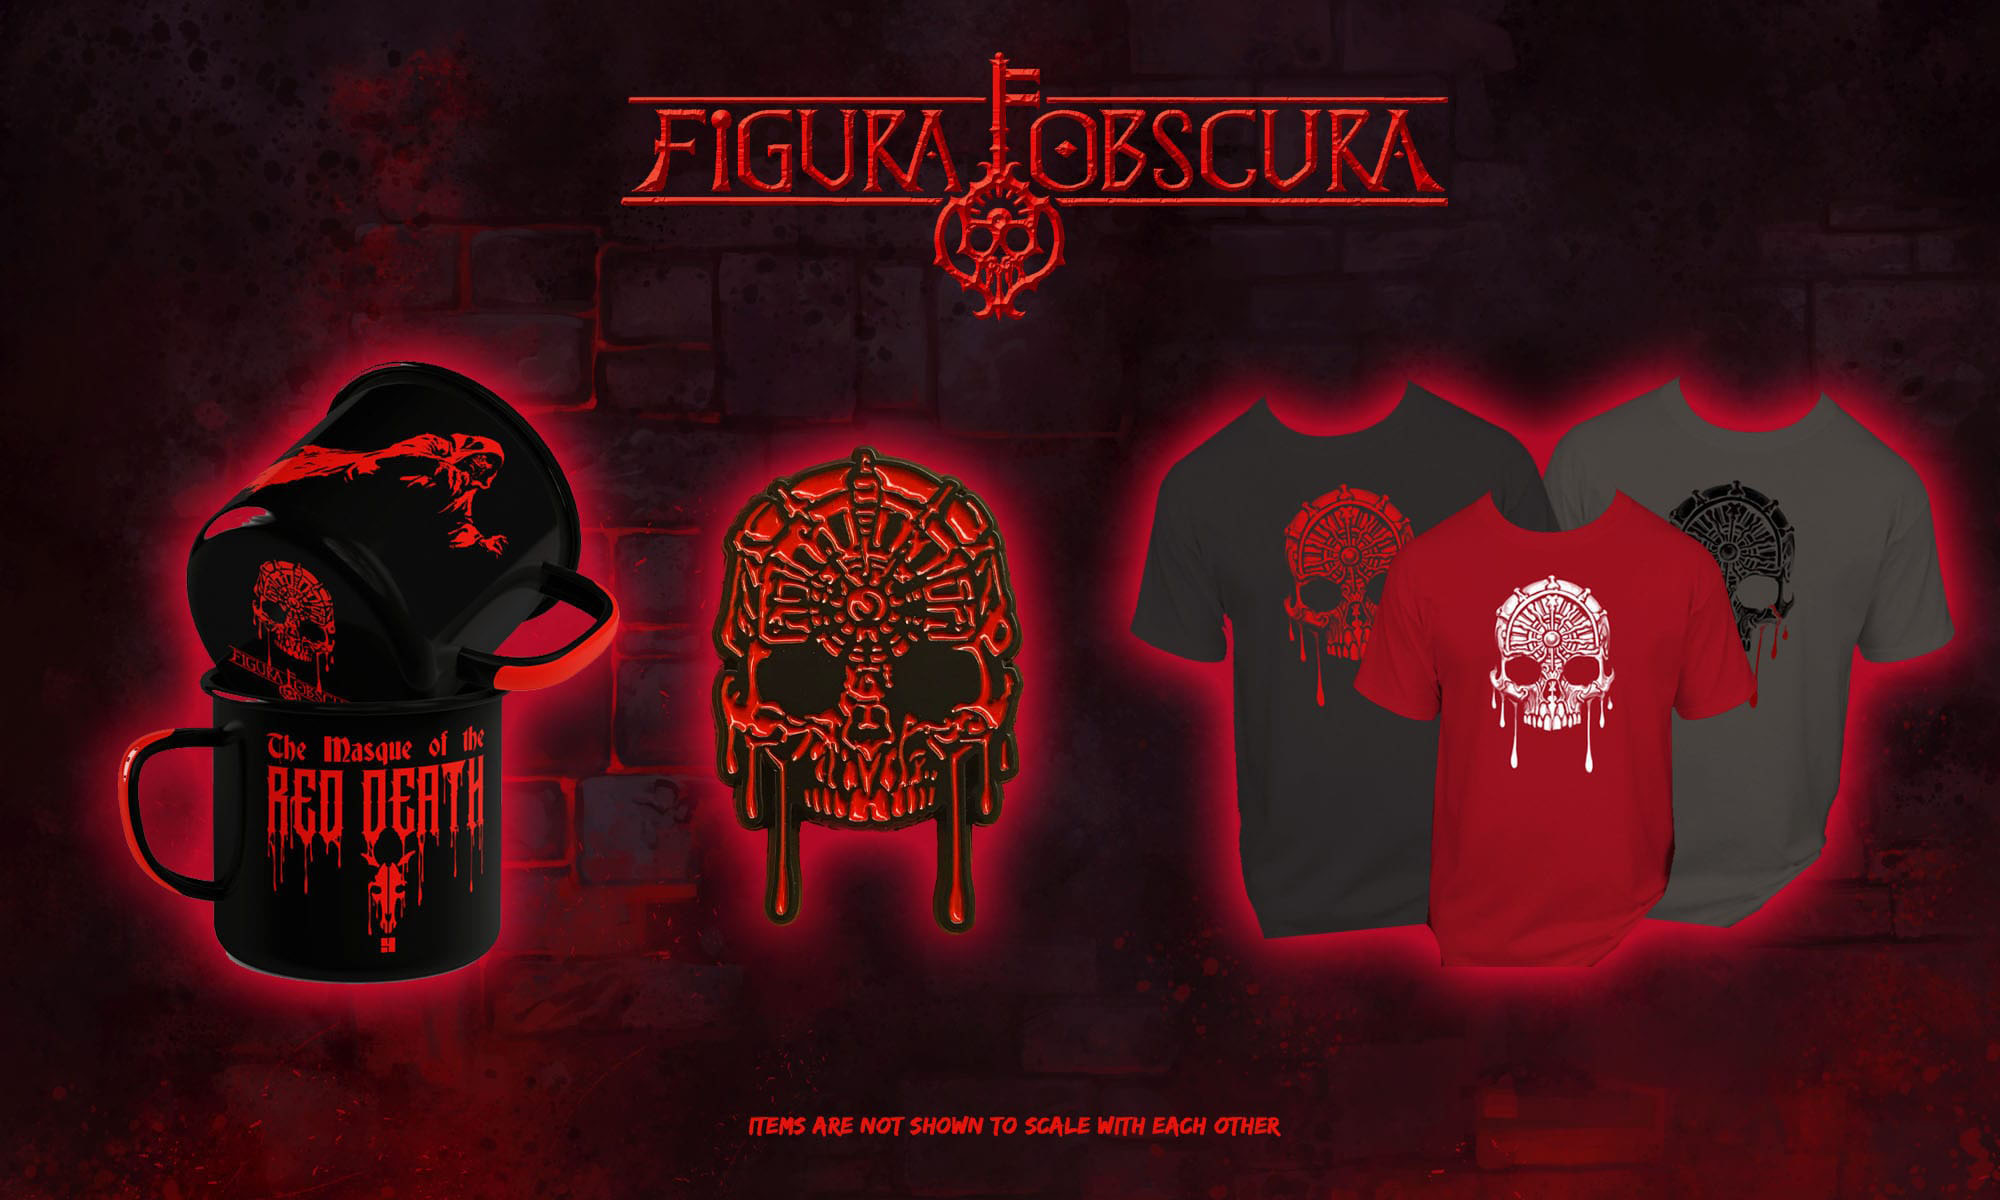 Figura Obscura - the Masque of the Red Death extras